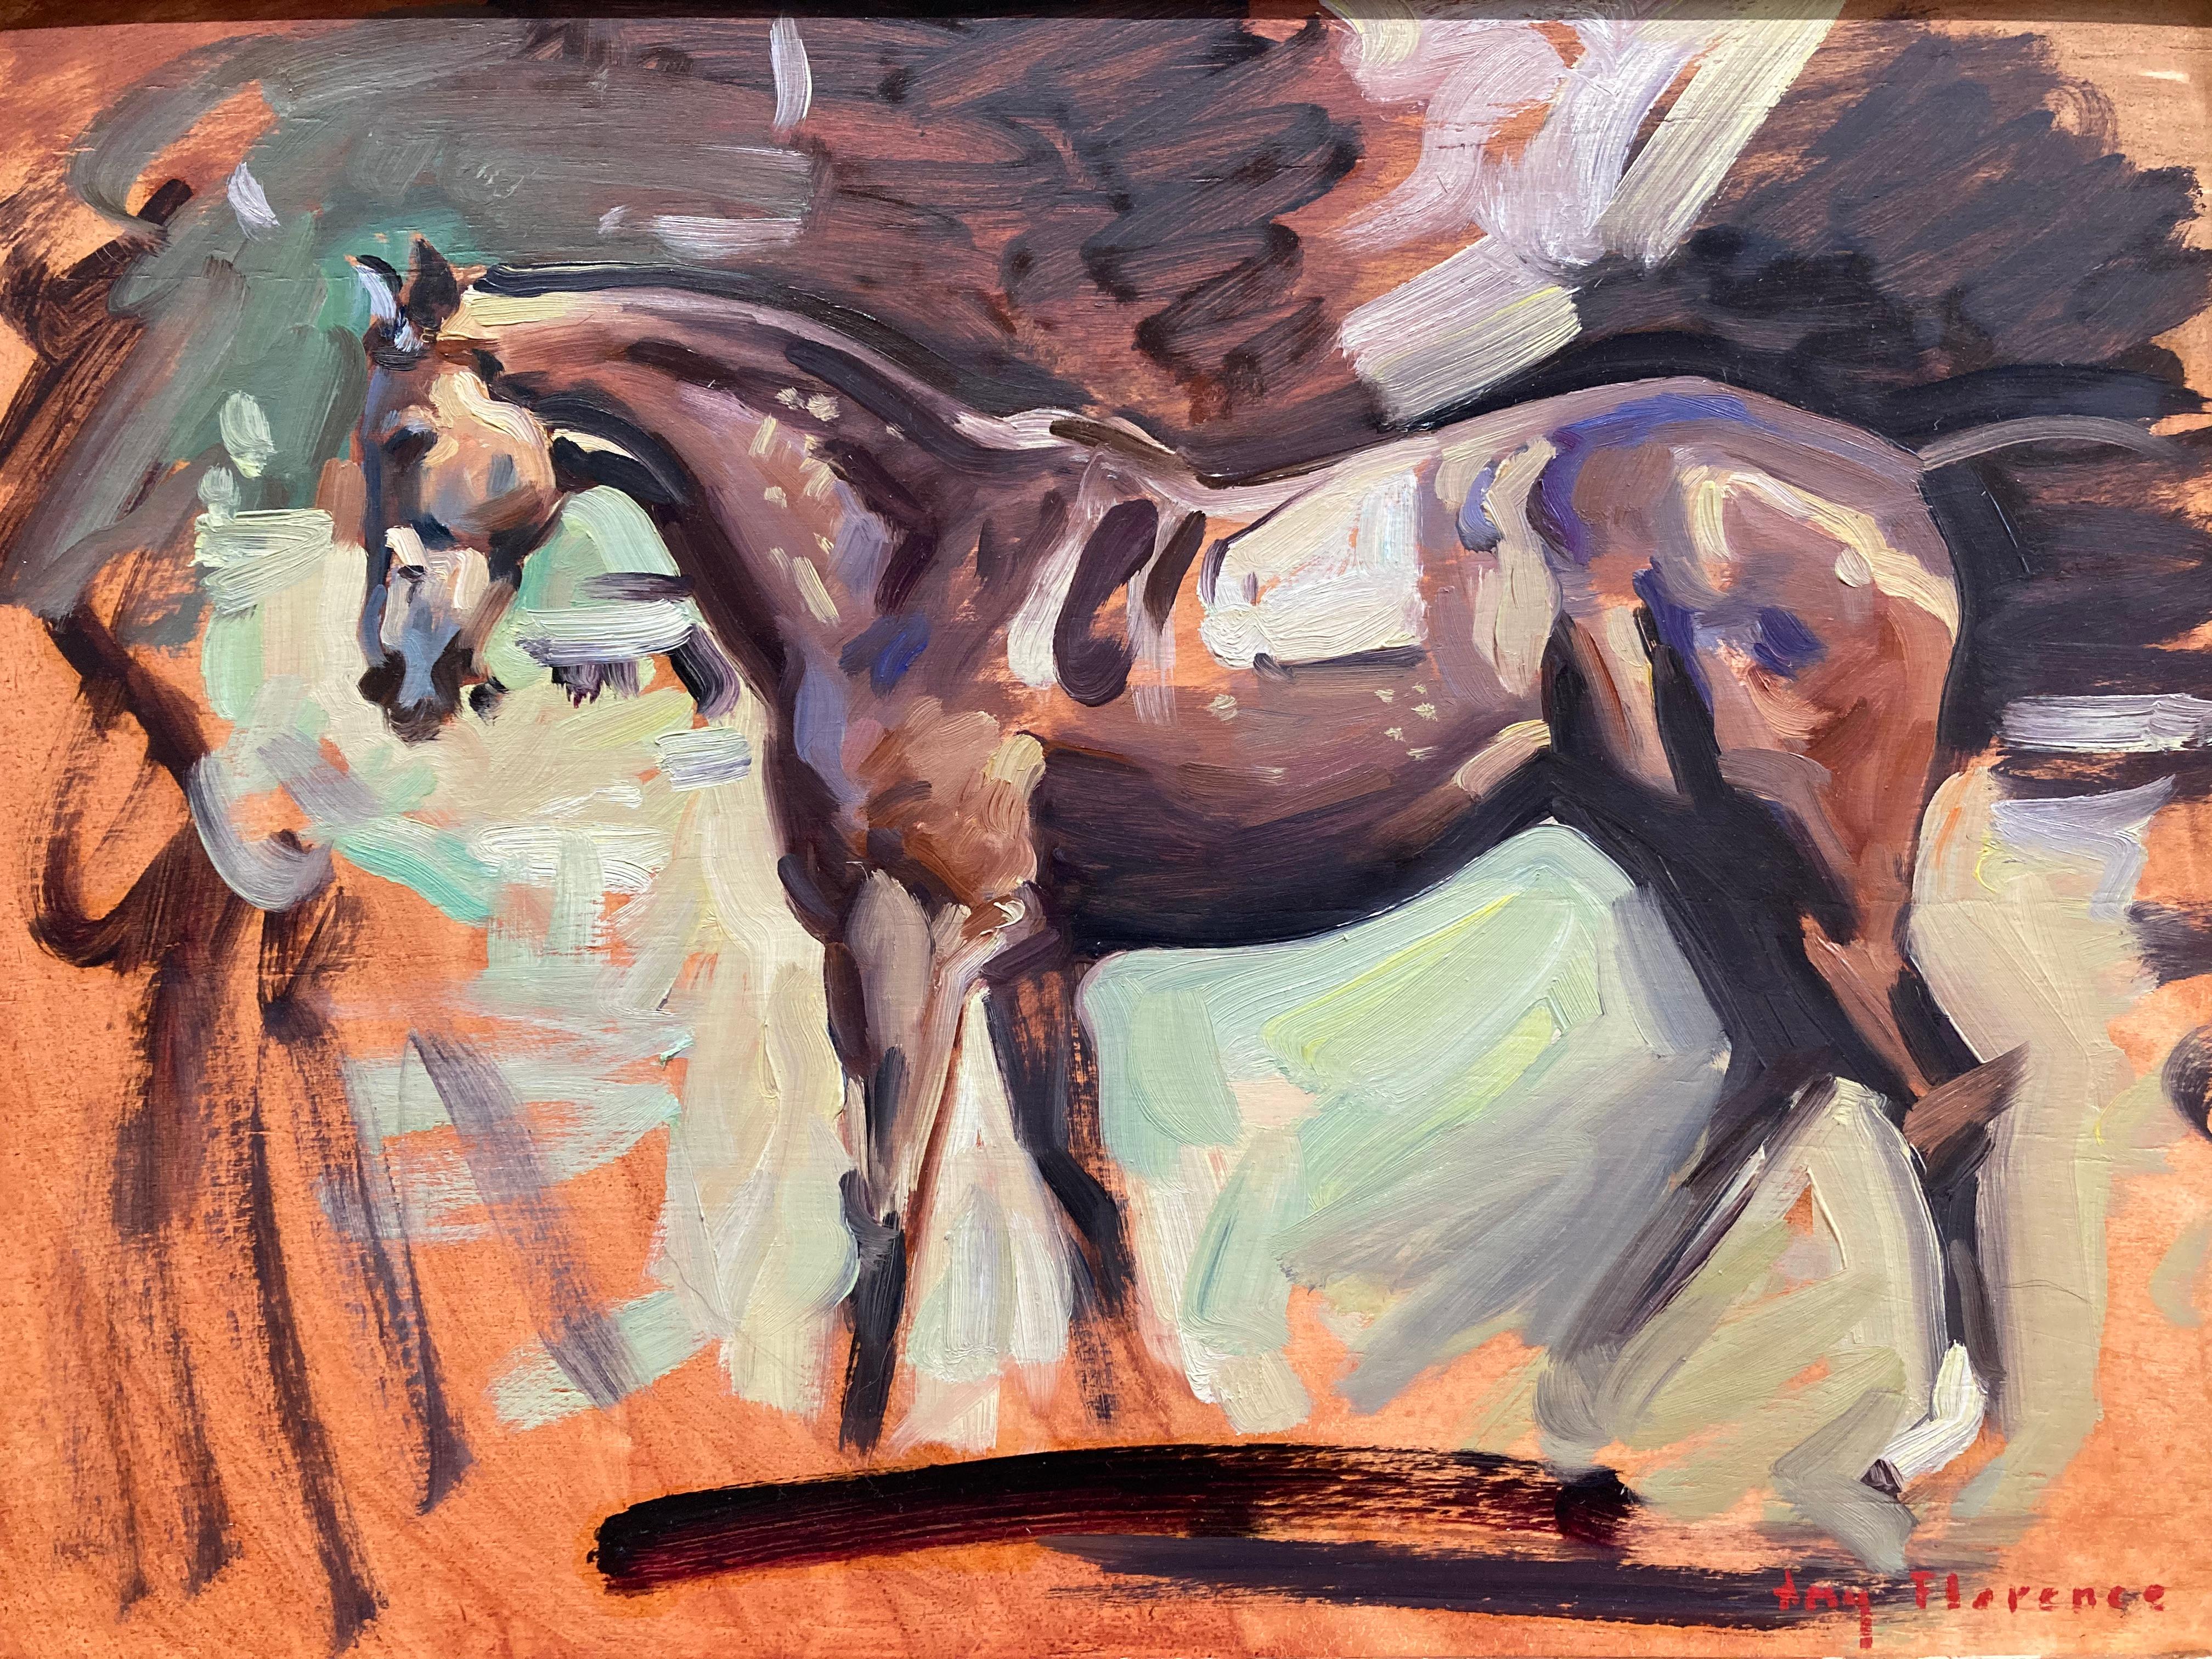 Amy Florence Interior Painting - "Horse Sketch 2" study of an Alfred Munnings painting, brown and earth tones